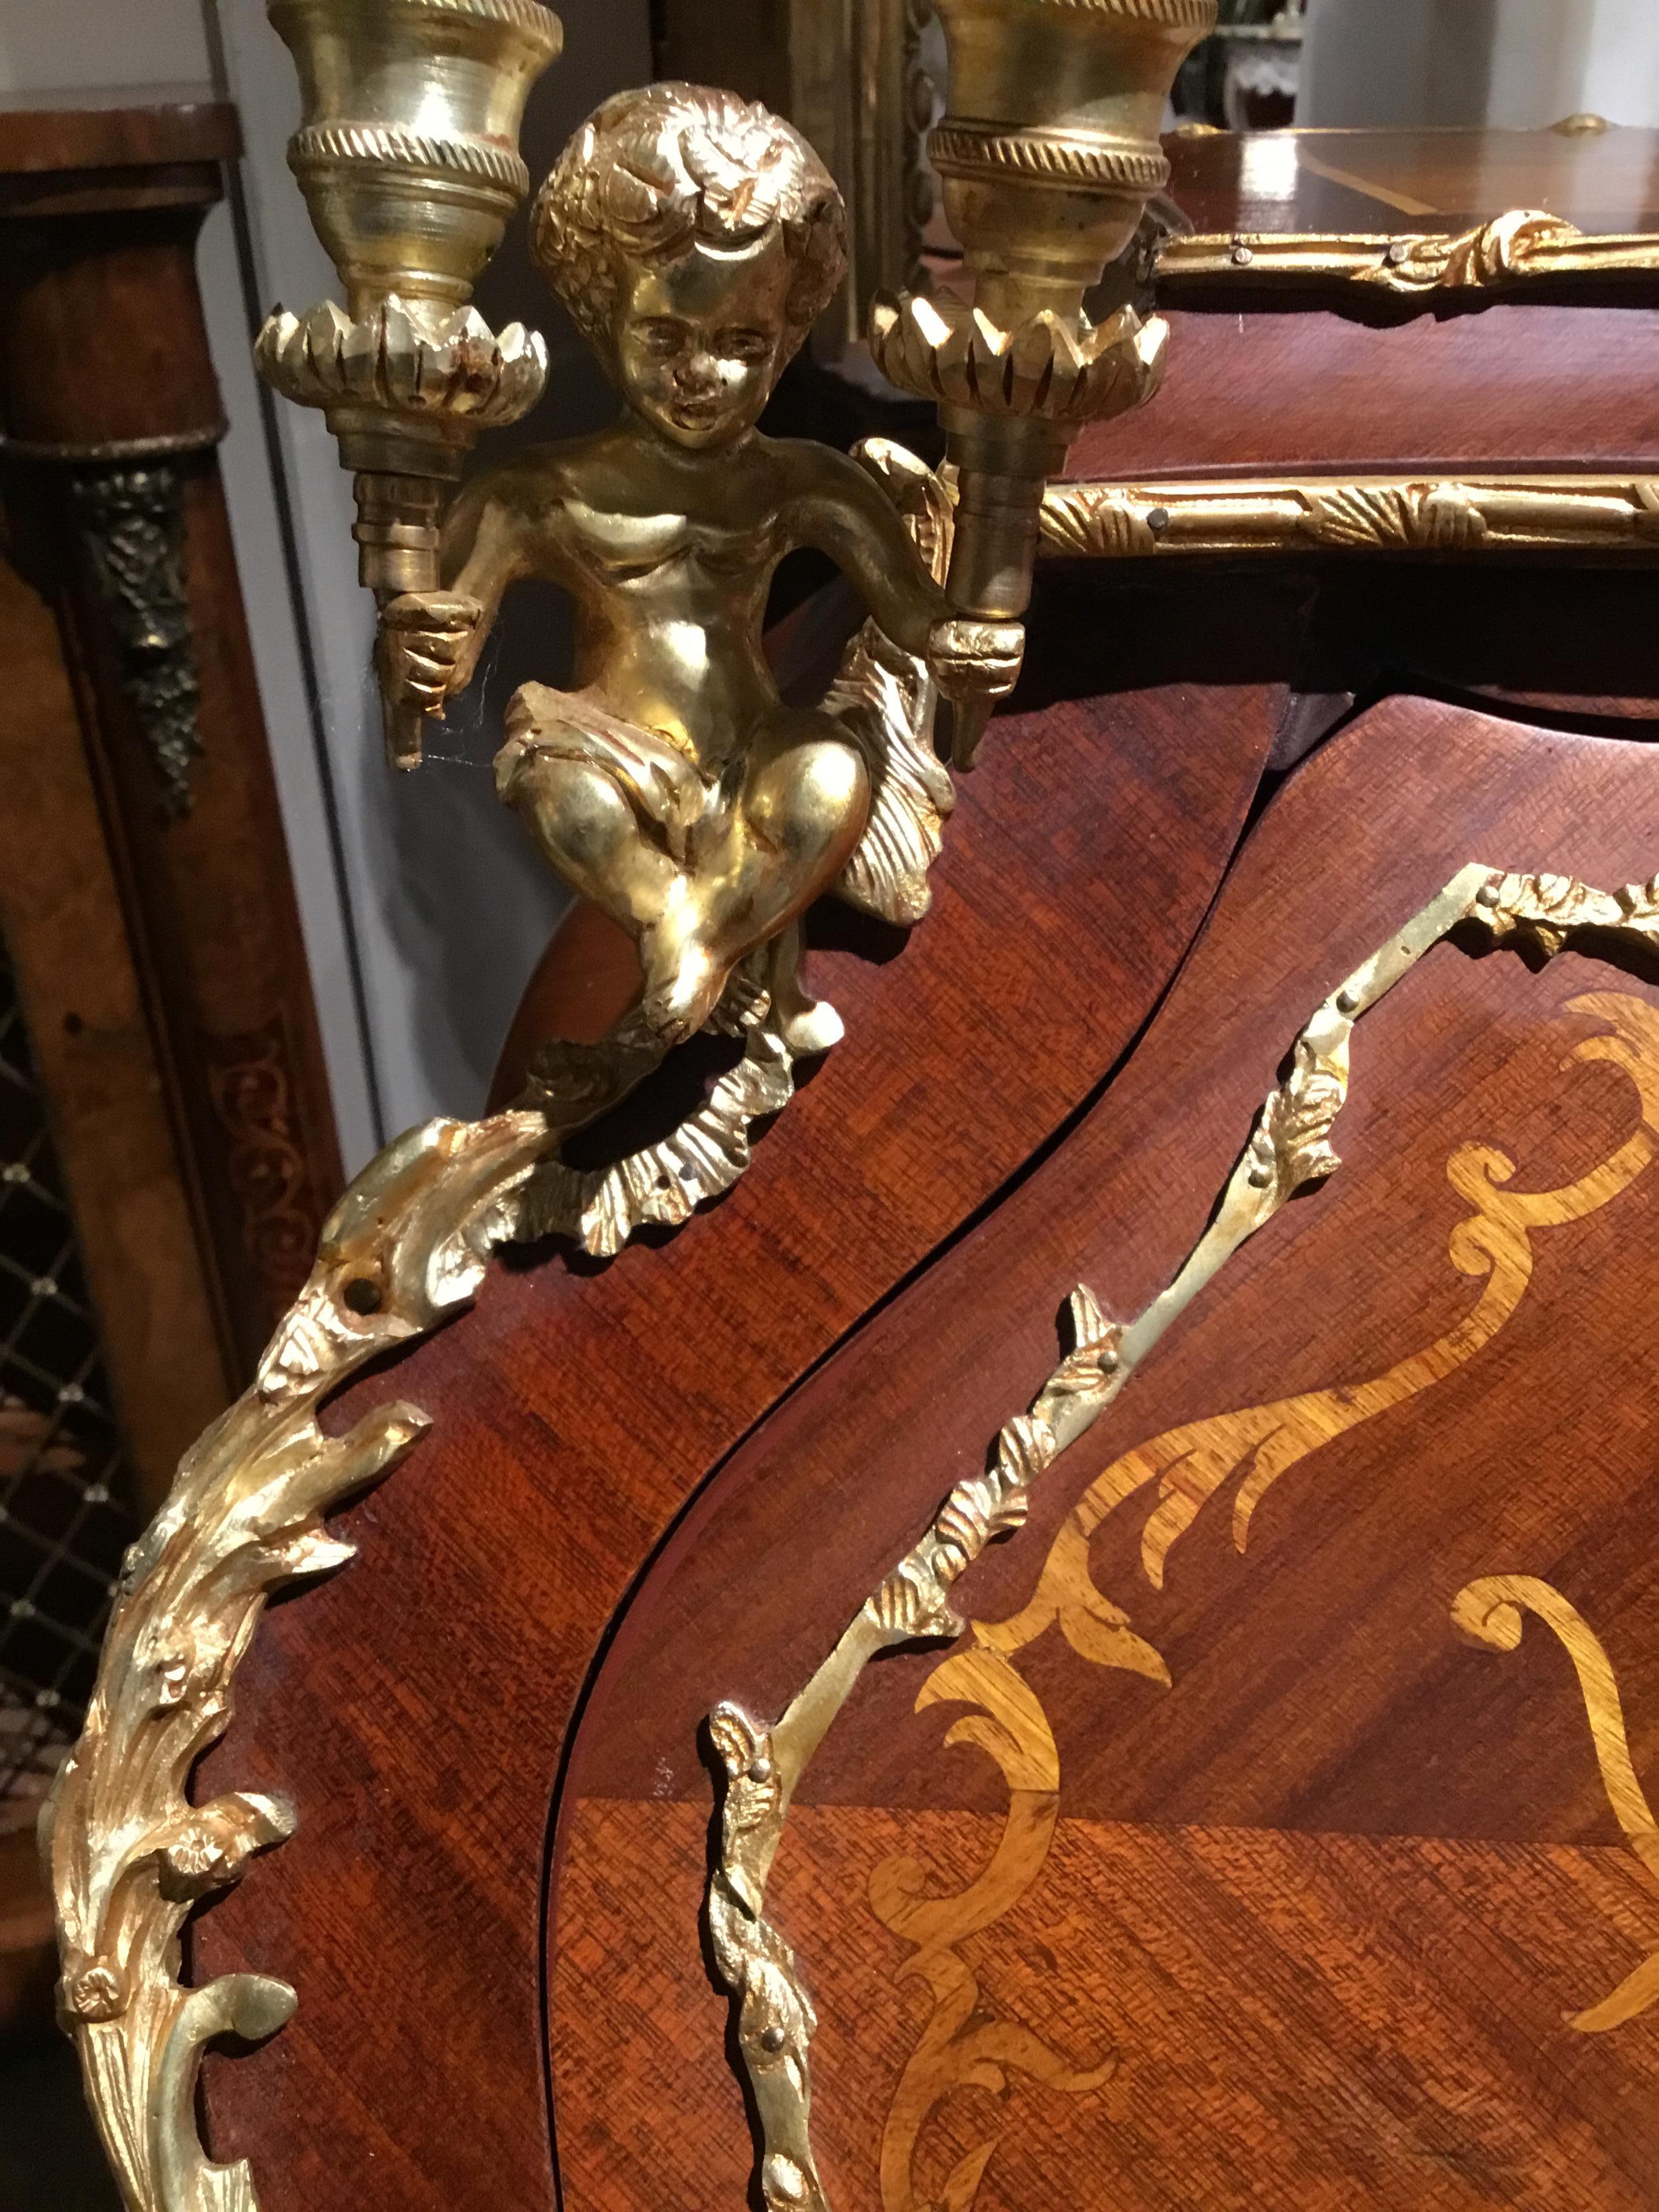 Fine petite writing desk with curved sides and gracefully carved legs in mahogany and
tulipwood combination. Bronze mounts accent this exquisite piece. Cherubs holding
candelabra are presented on the front corners.